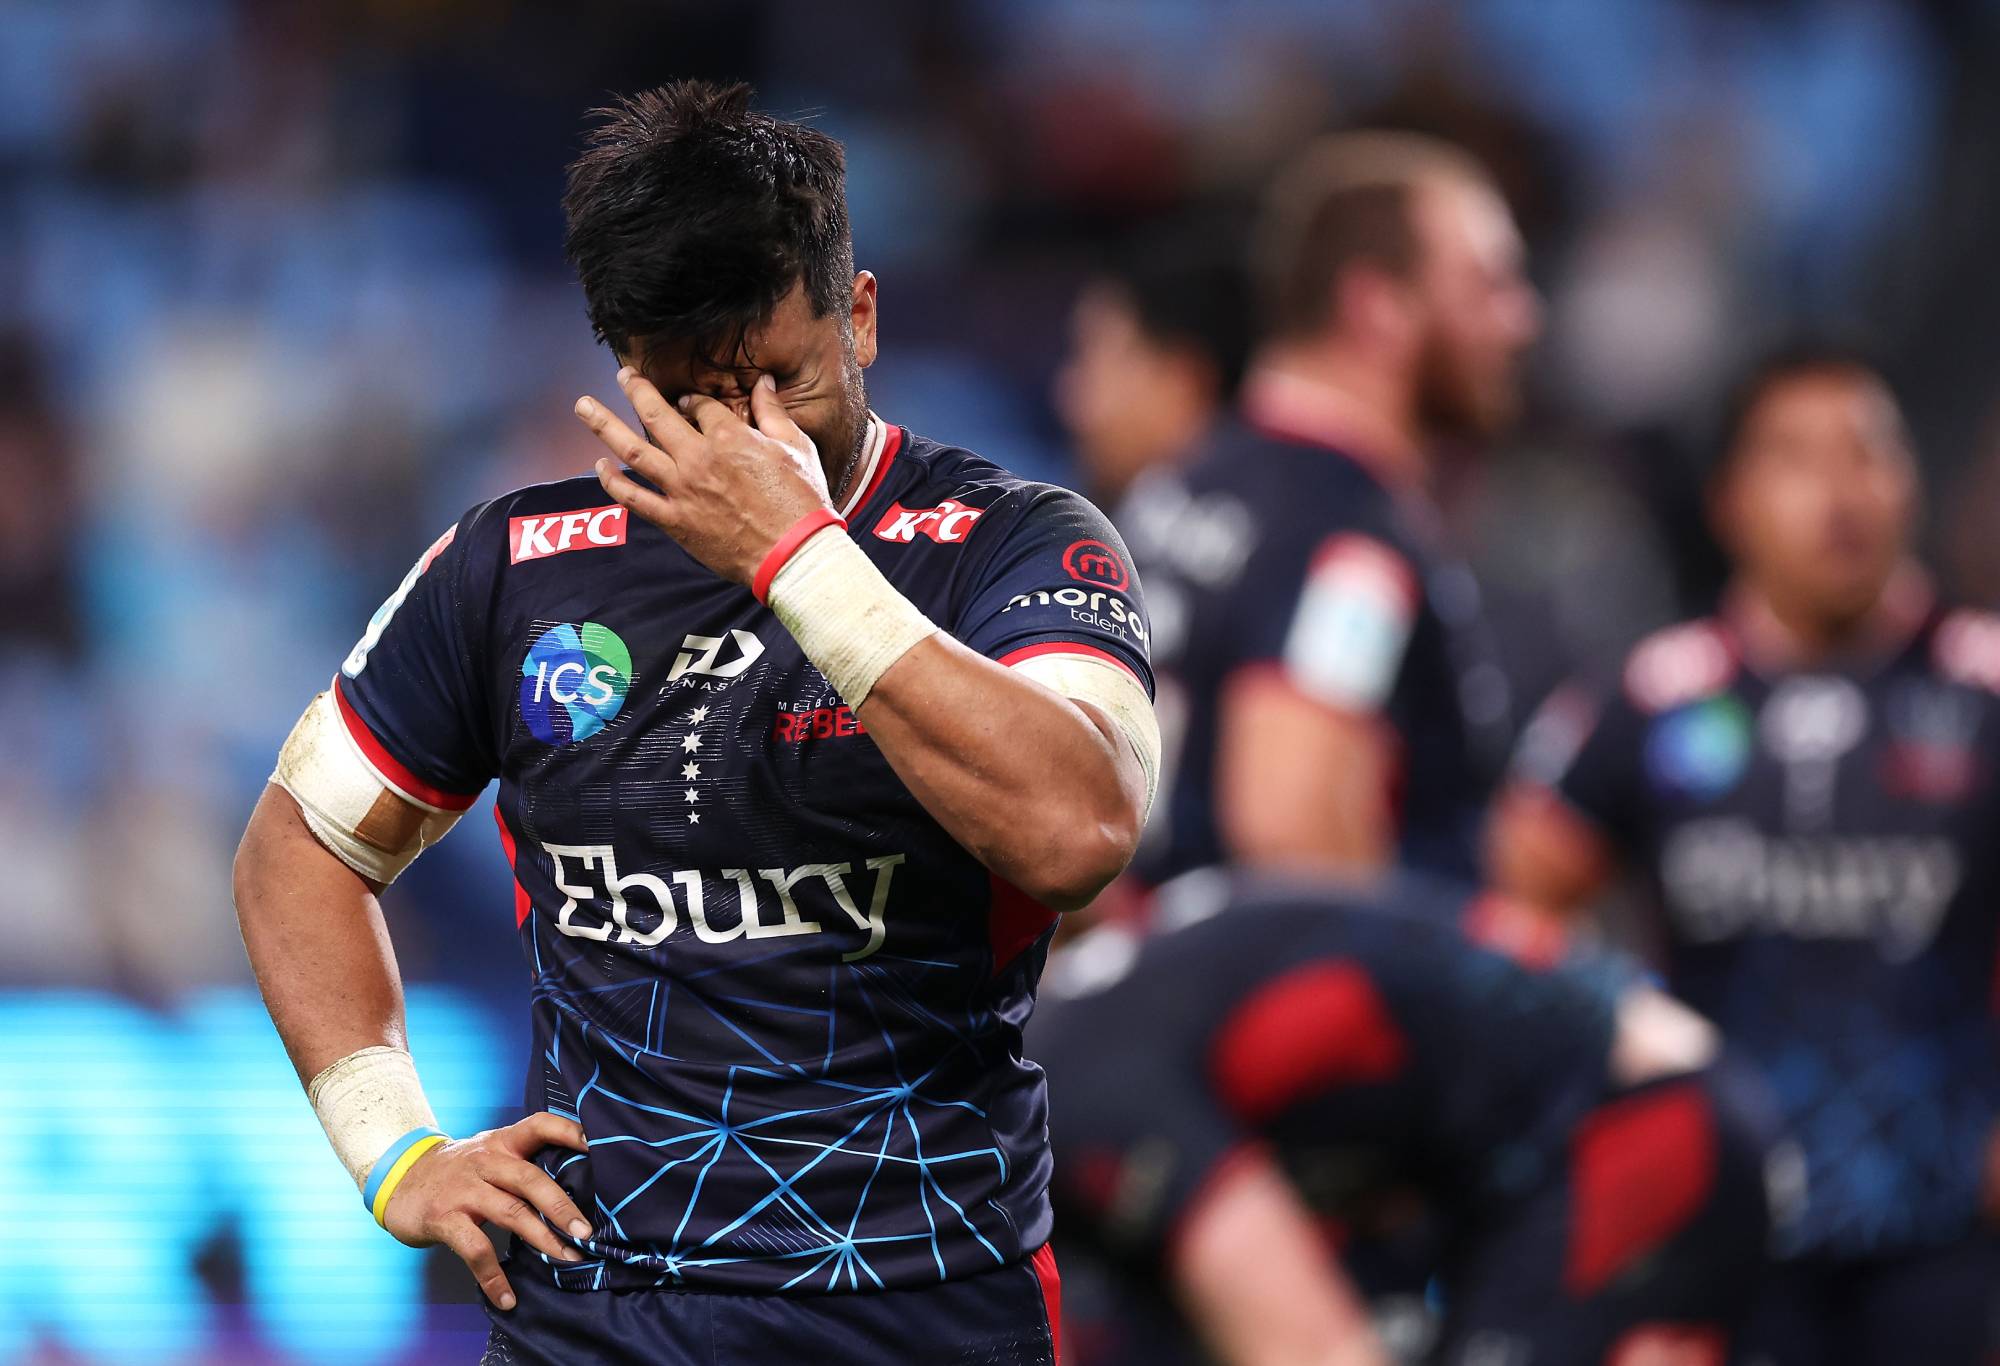 Rebels told they will play Super Rugby in 2024 but future on shaky ground as voluntary administration looms